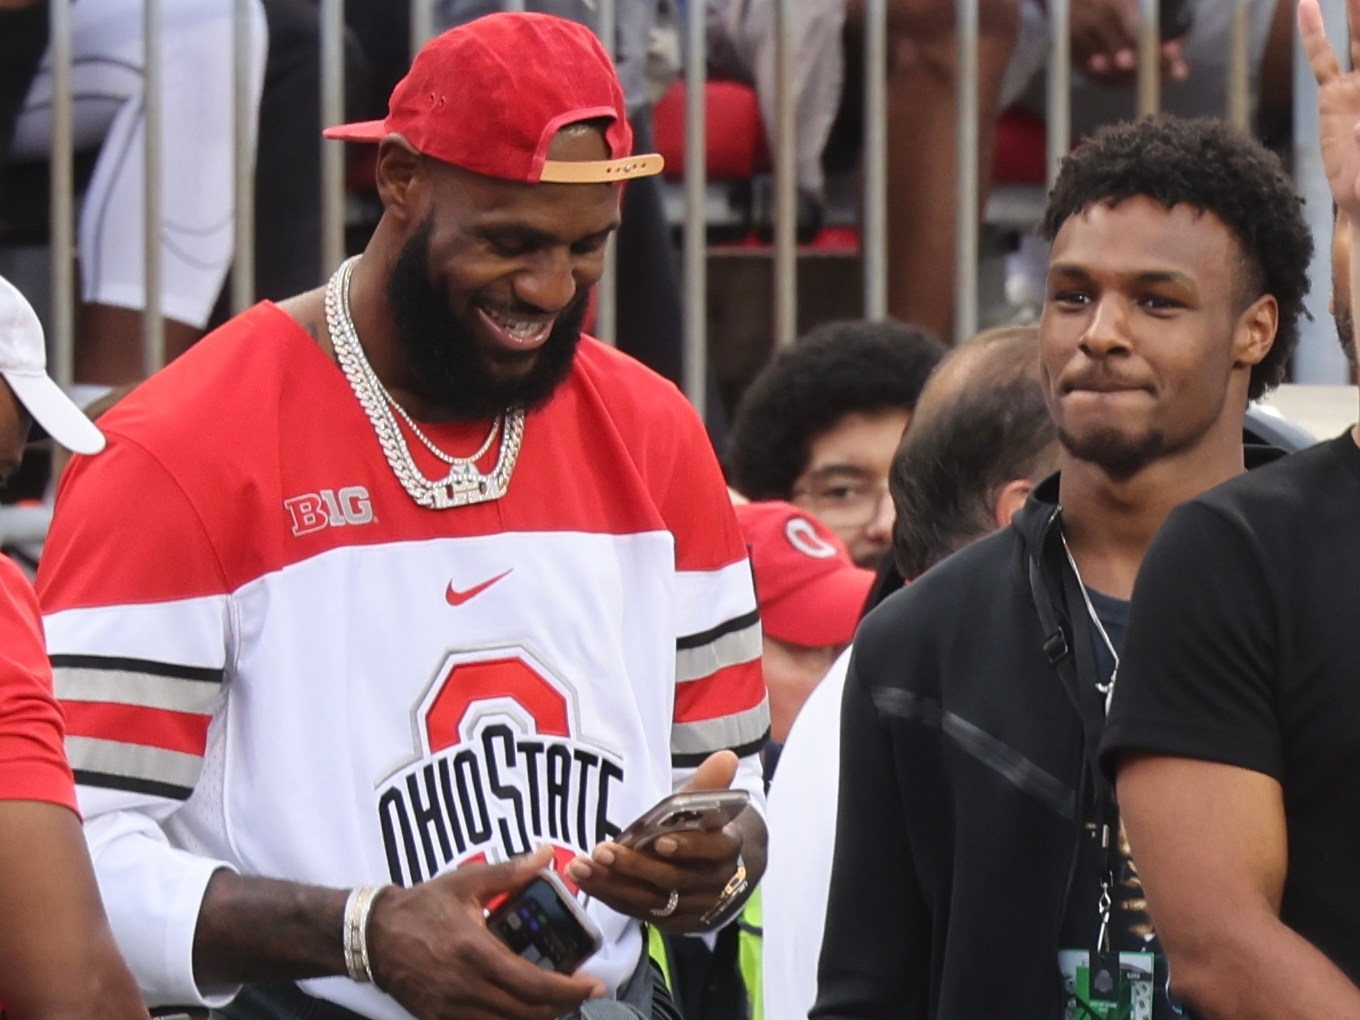 VIDEO: Lakers' LeBron James, son Bronny spotted at Ohio State vs